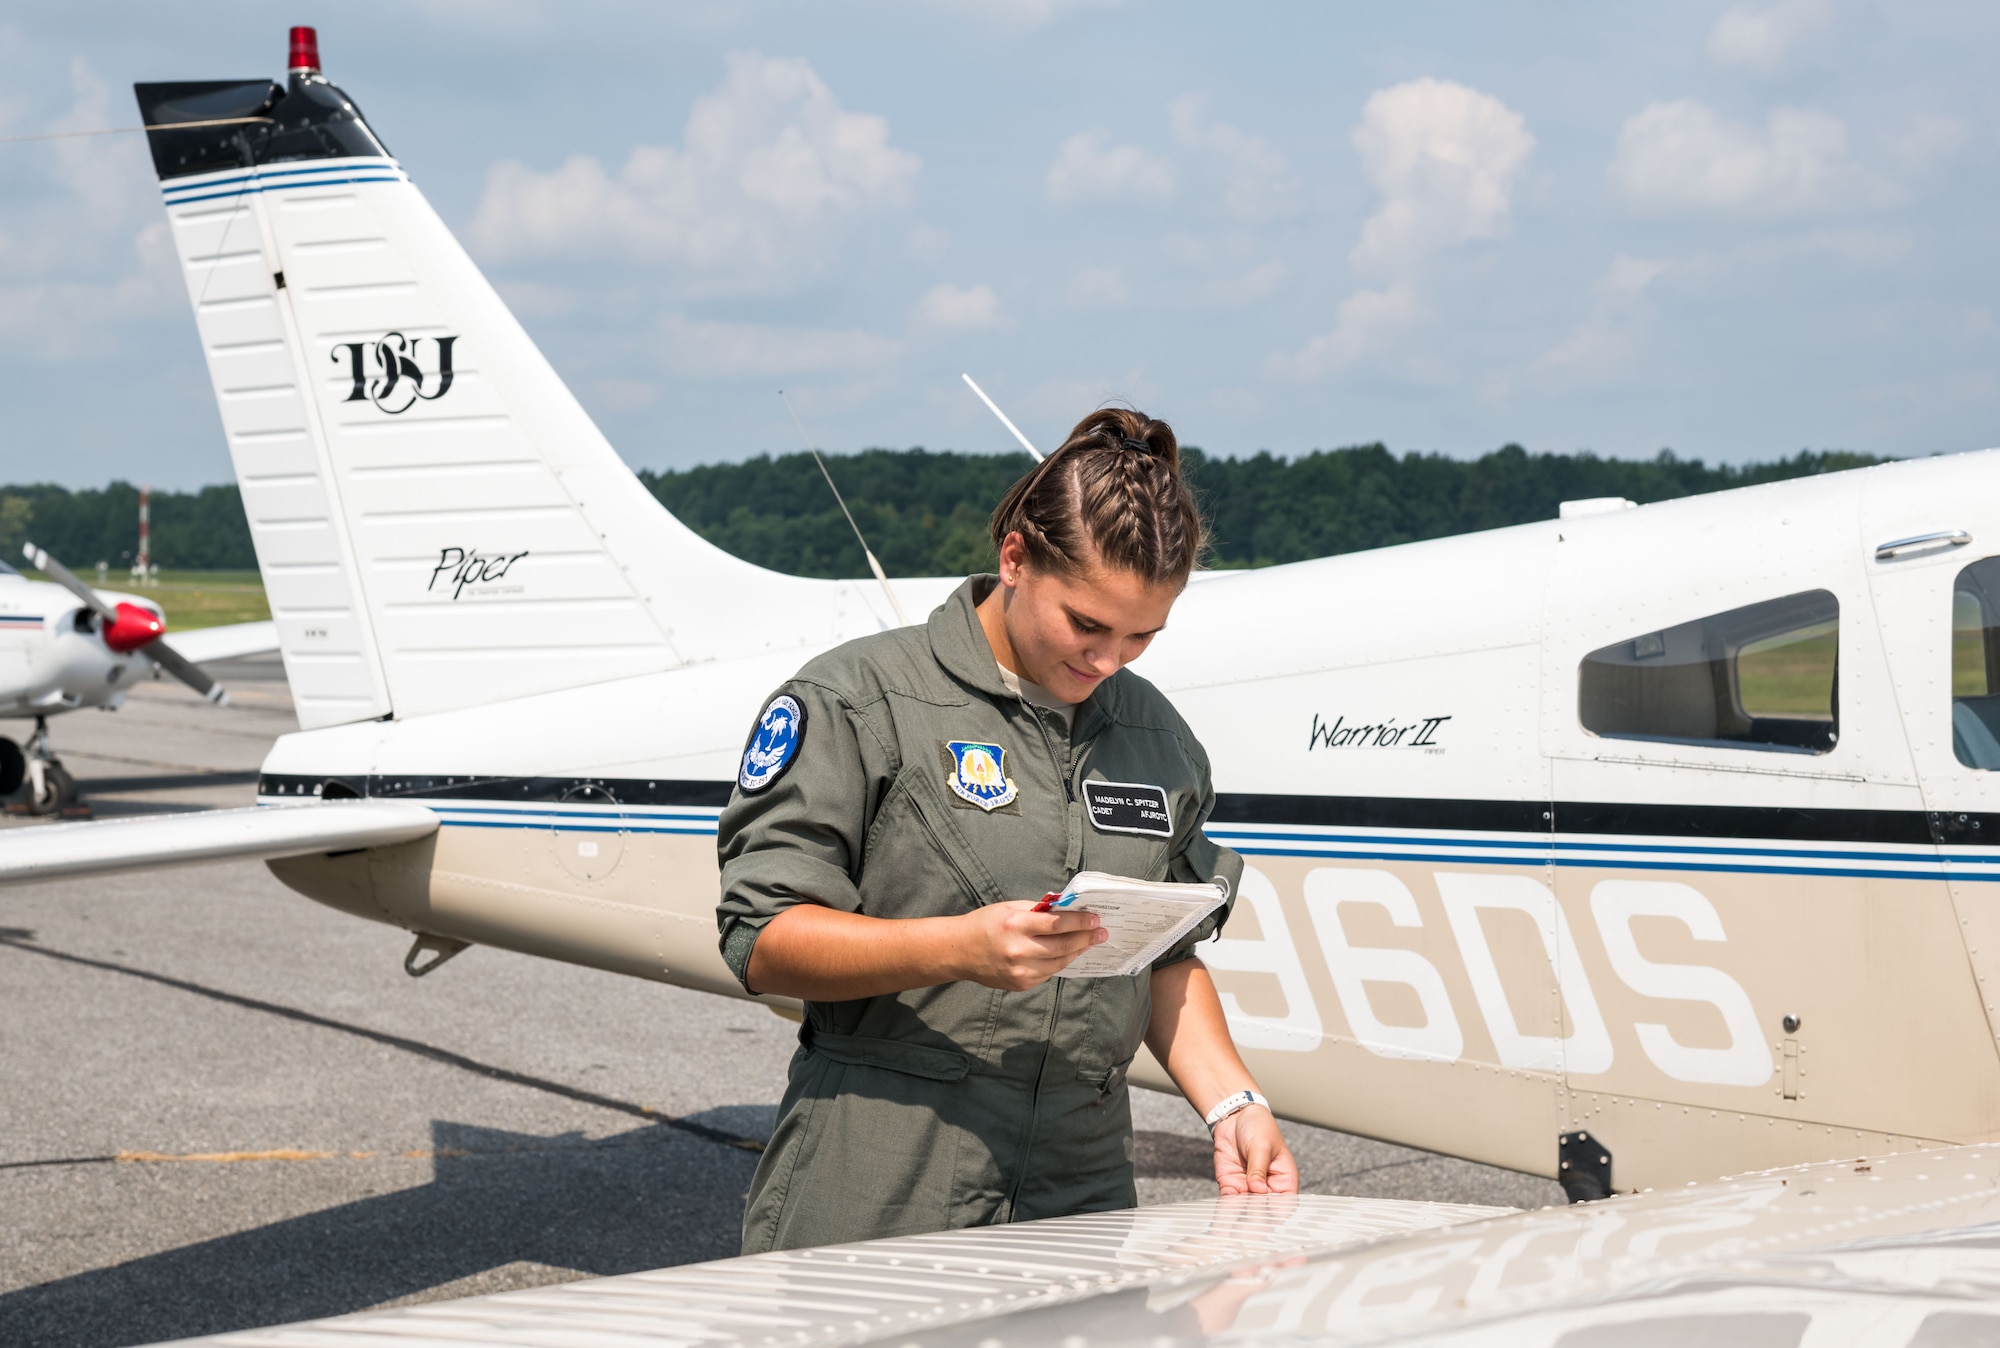 Air Force Junior Reserve Officers’ Training Corps cadet Madelyn Spitzer, checks the right wing on a Piper Warrior II during the preflight of the aircraft Aug. 6, 2019, at Delaware Airpark in Cheswold, Del. Spitzer and Mohammad Ahmed, Delaware State University certified flight instructor, flew around the airpark and practiced skills learned during the eight-week AFJROTC Summer Flight Academy held at DSU in Dover. Spitzer is a cadet with AFJROTC Detachment SC-951, Clover High School, Clover, S.C. (U.S. Air Force photo by Roland Balik)